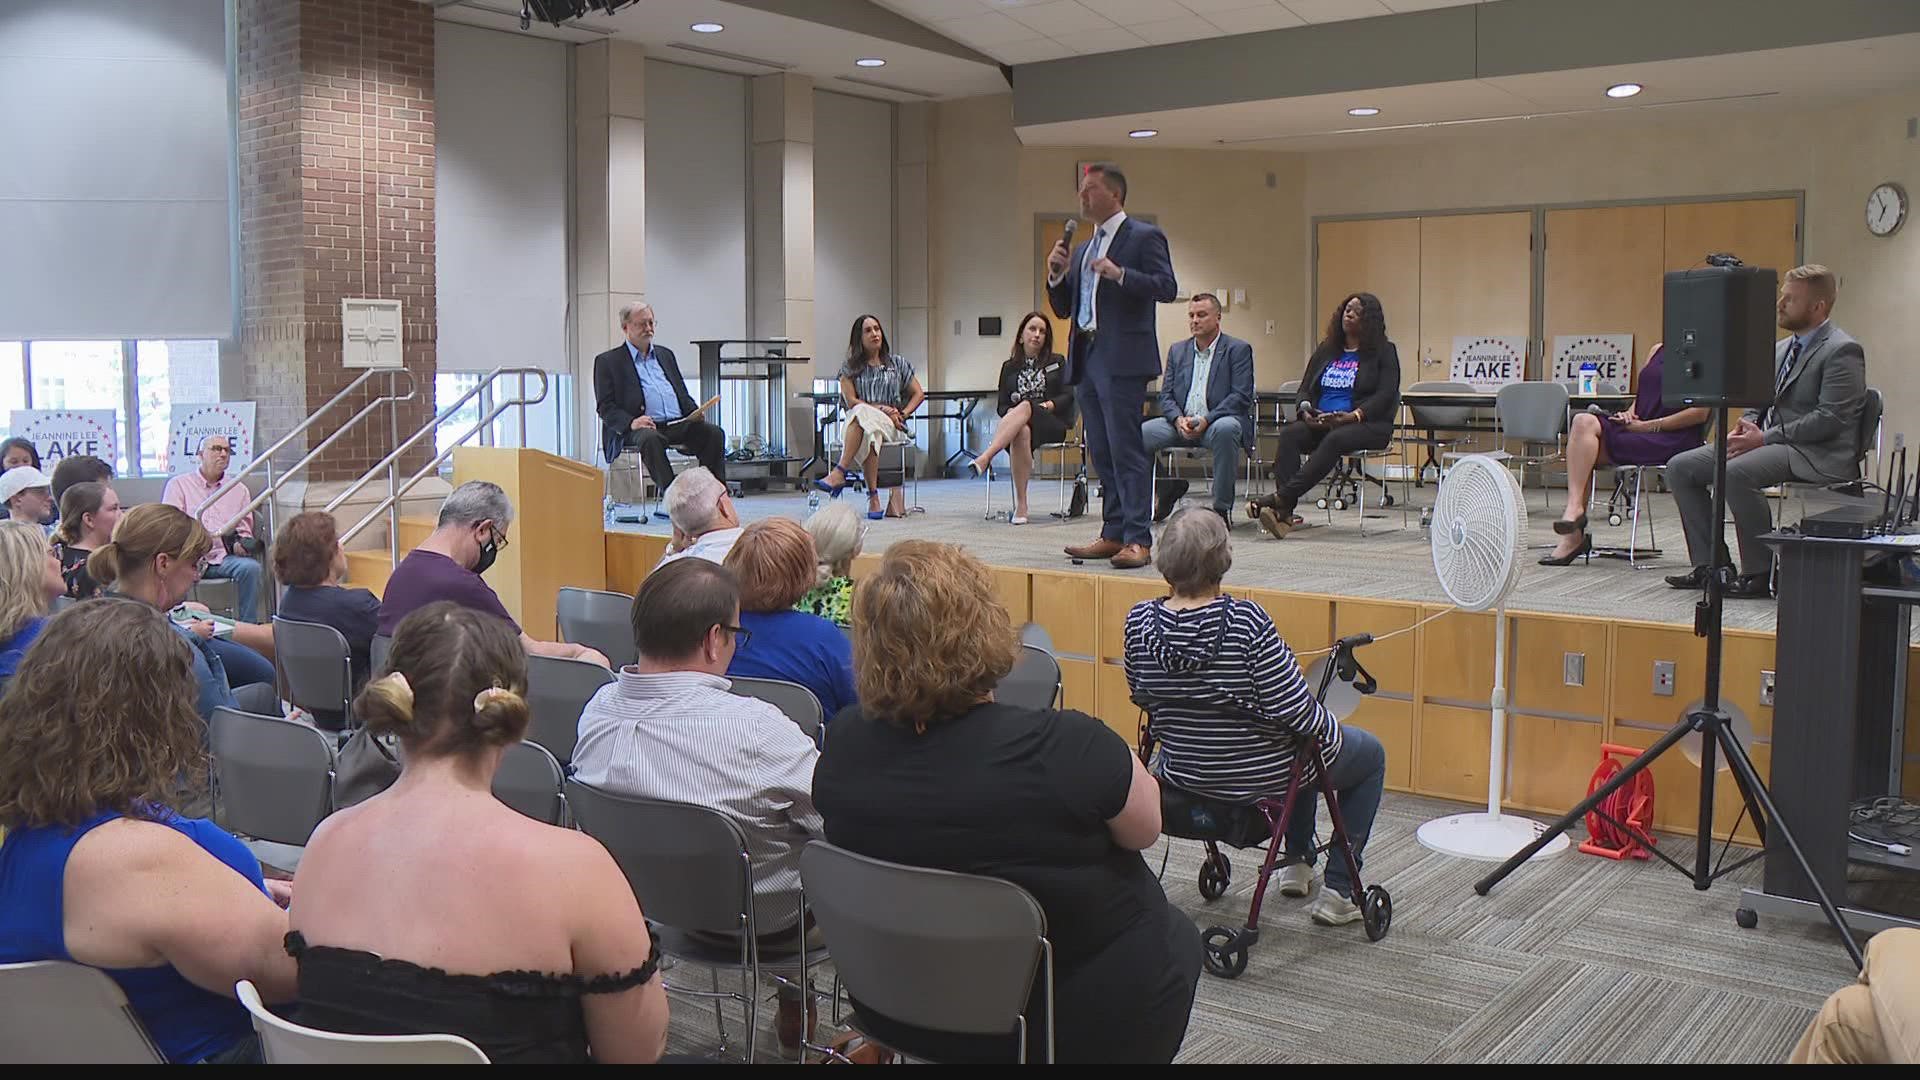 The event, held at a Fishers library, is one of two such forums planned for this week in central Indiana.